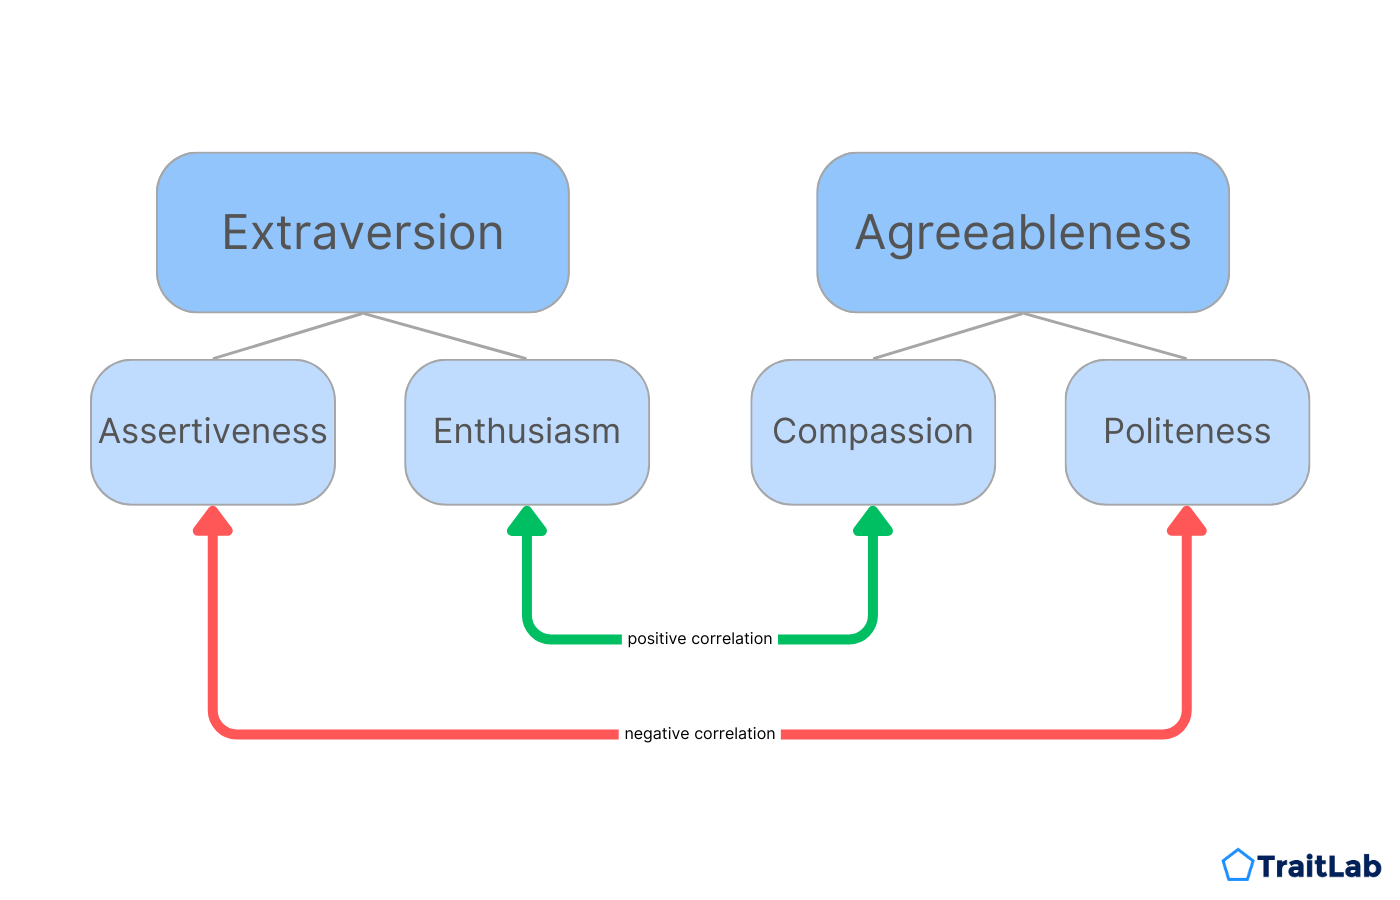 A diagram of the aspect components of Big Five Agreeableness and Extraversion: Assertiveness, Enthusiasm, Compassion, and Politeness.